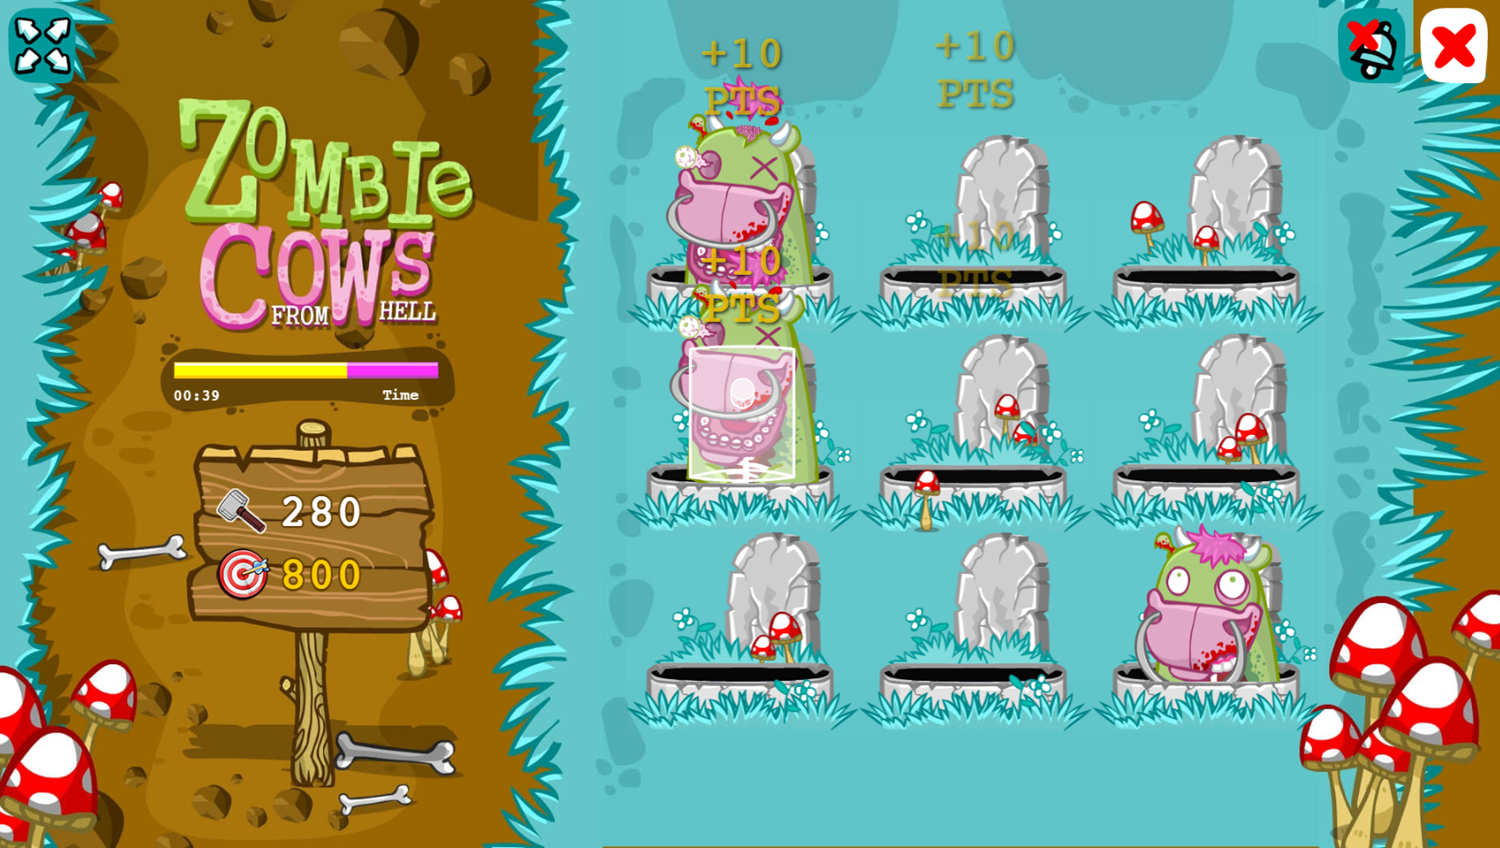 Zombie Cows From Hell Game Level Play Screenshot.